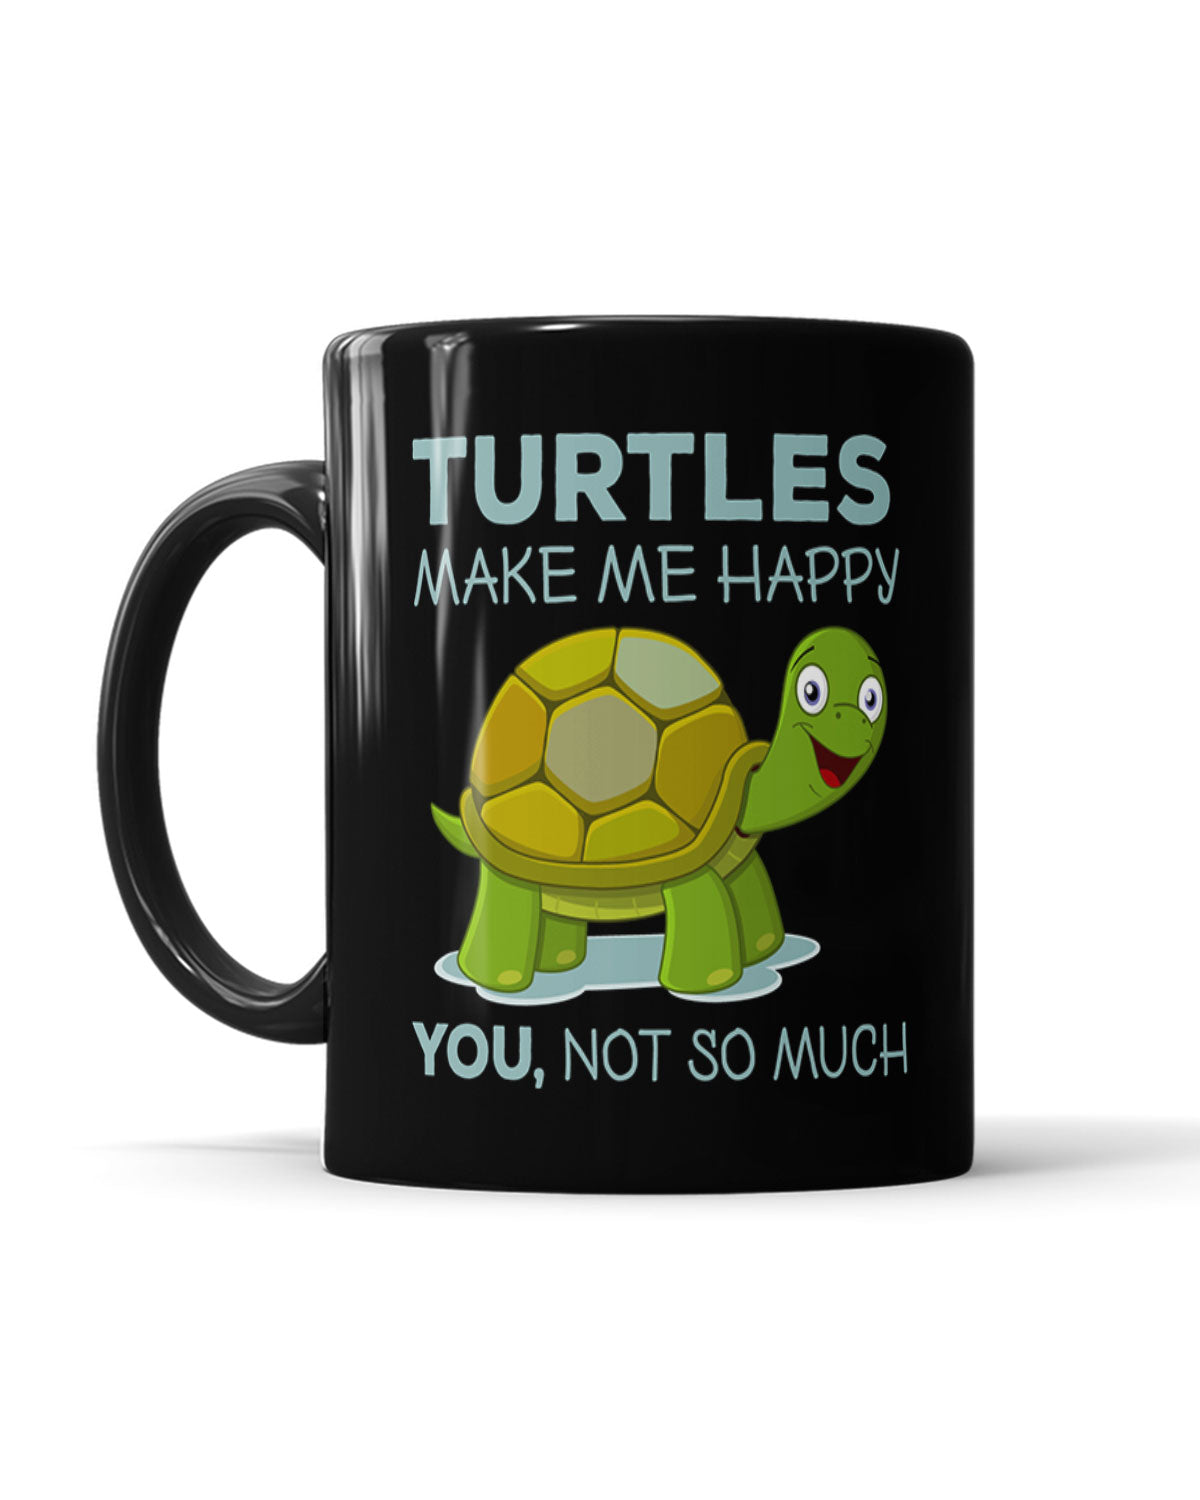 Turtles Make Me Happy. You, Not So Much